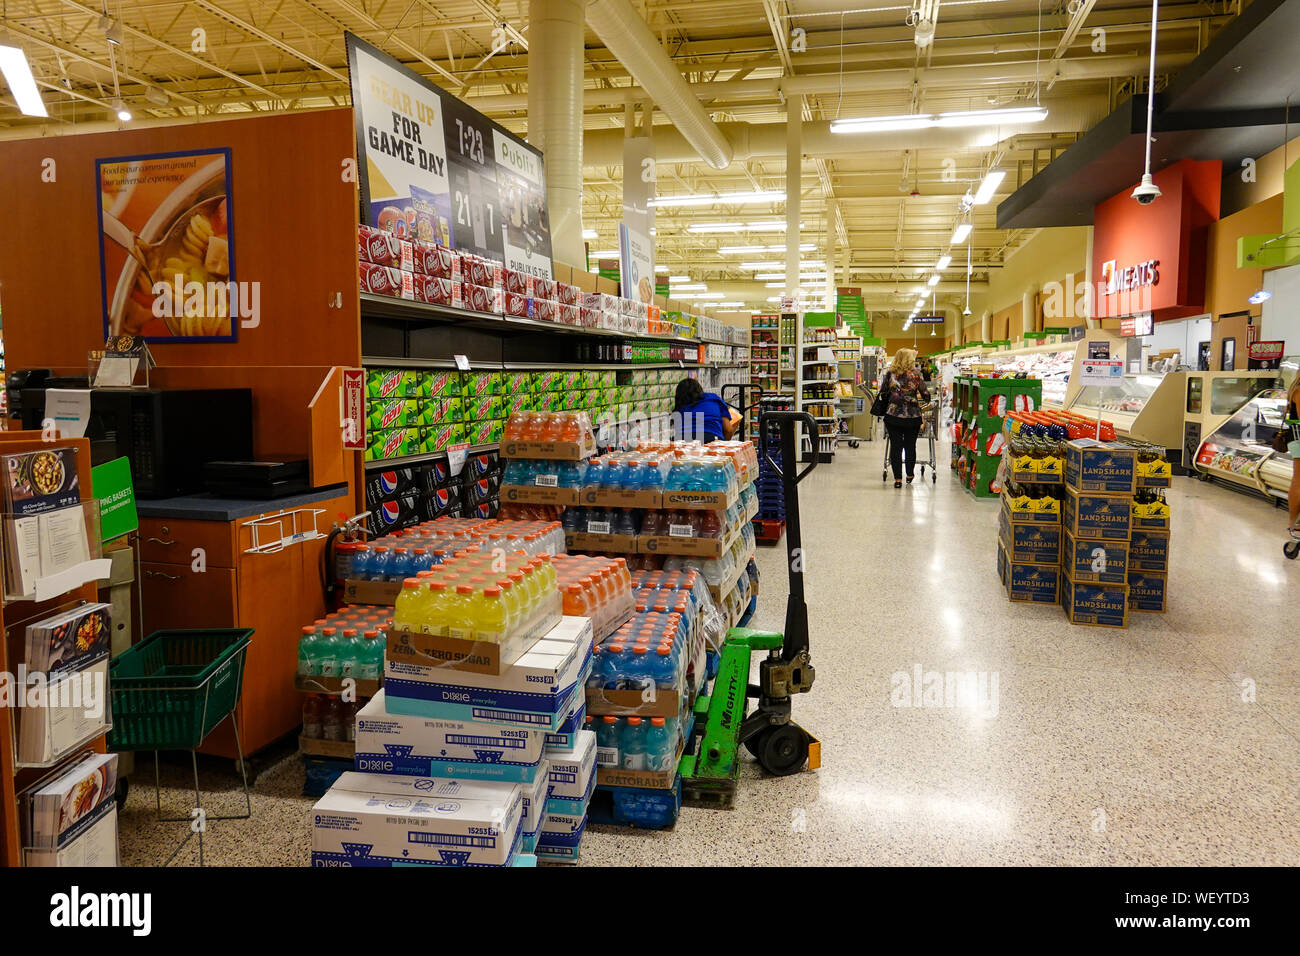 Orlando,FL/USA-8/30/19: Empty grocery store shelves of soda and power drinks before a hurricane or snow storm. Stock Photo